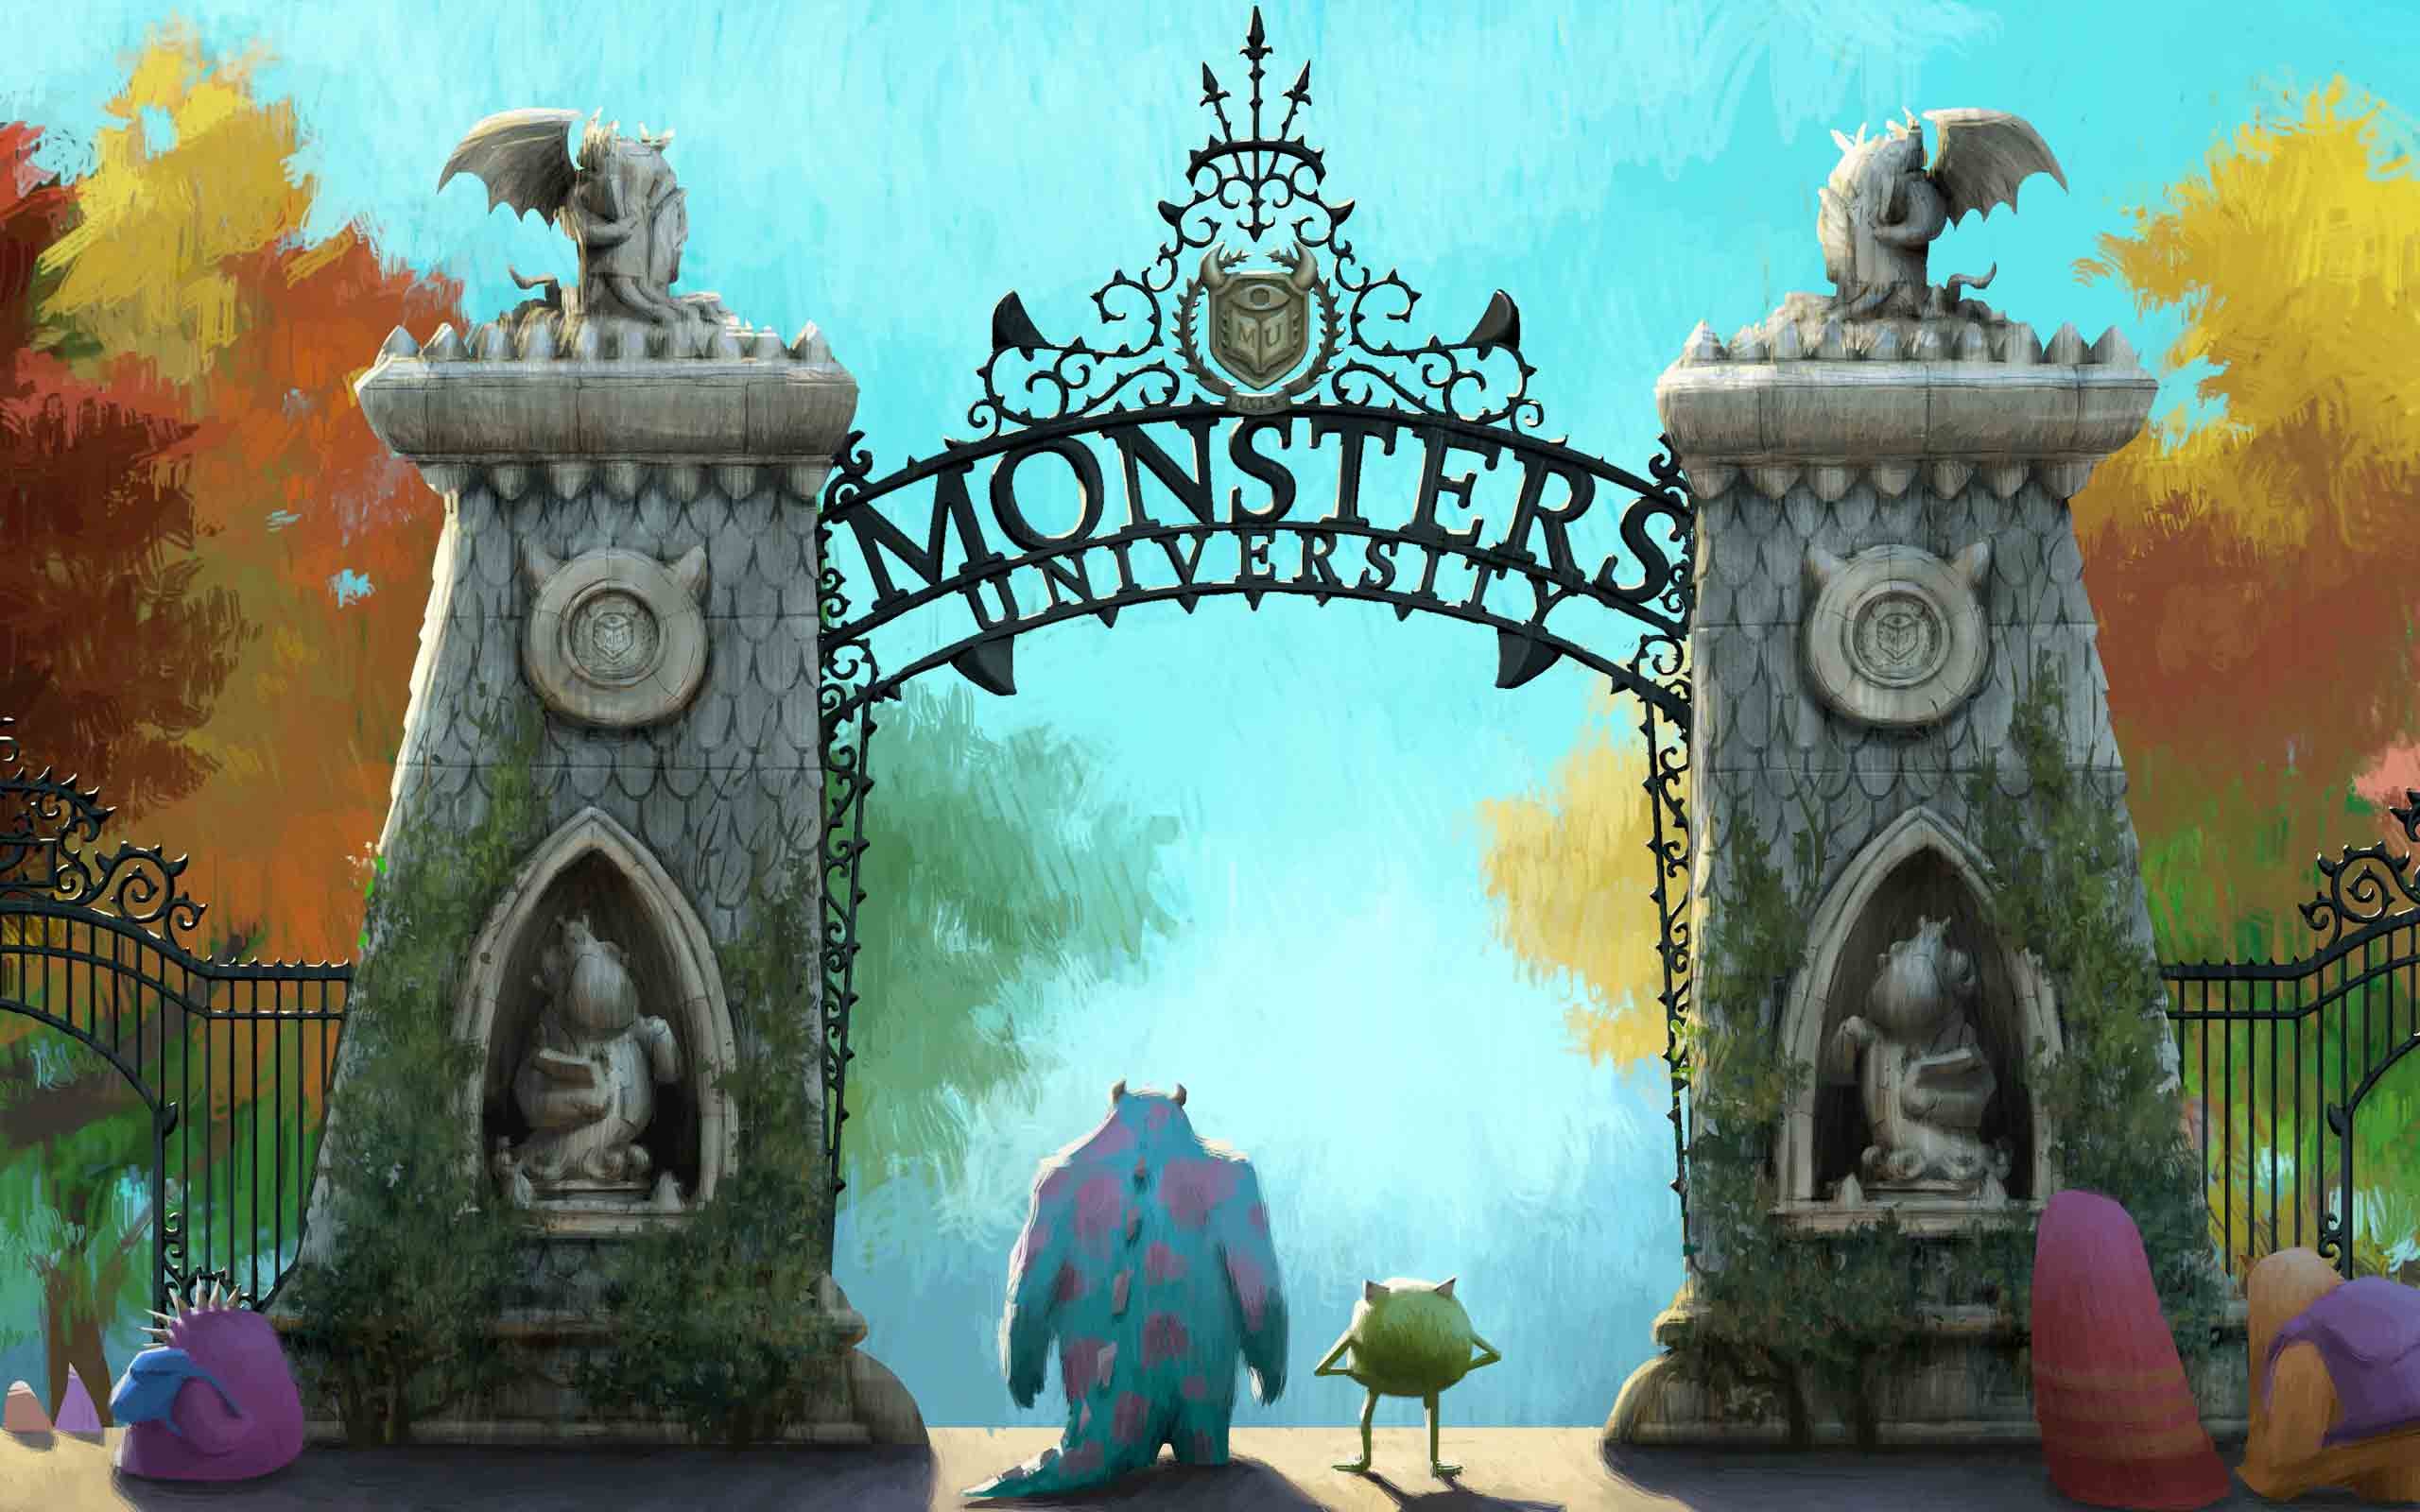 2560x1600 Monsters University Movie Wallpapers and Desktop Backgrounds